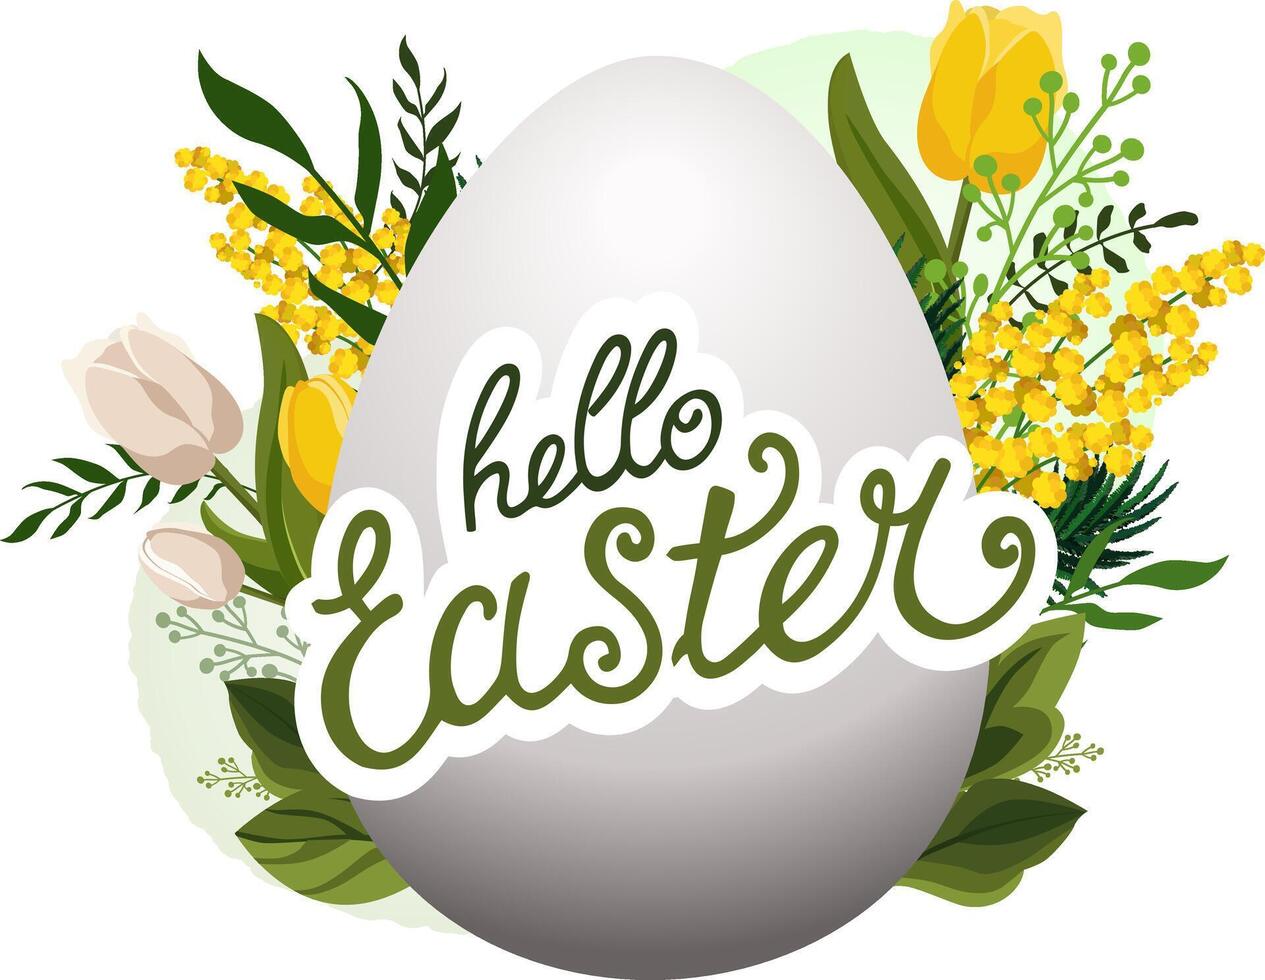 Vector white egg with text Hello Easter and with green leaves, mimosa and branches on background. Illustration in flat style. Spring clipart for design of card, banner, flyer, sale, poster